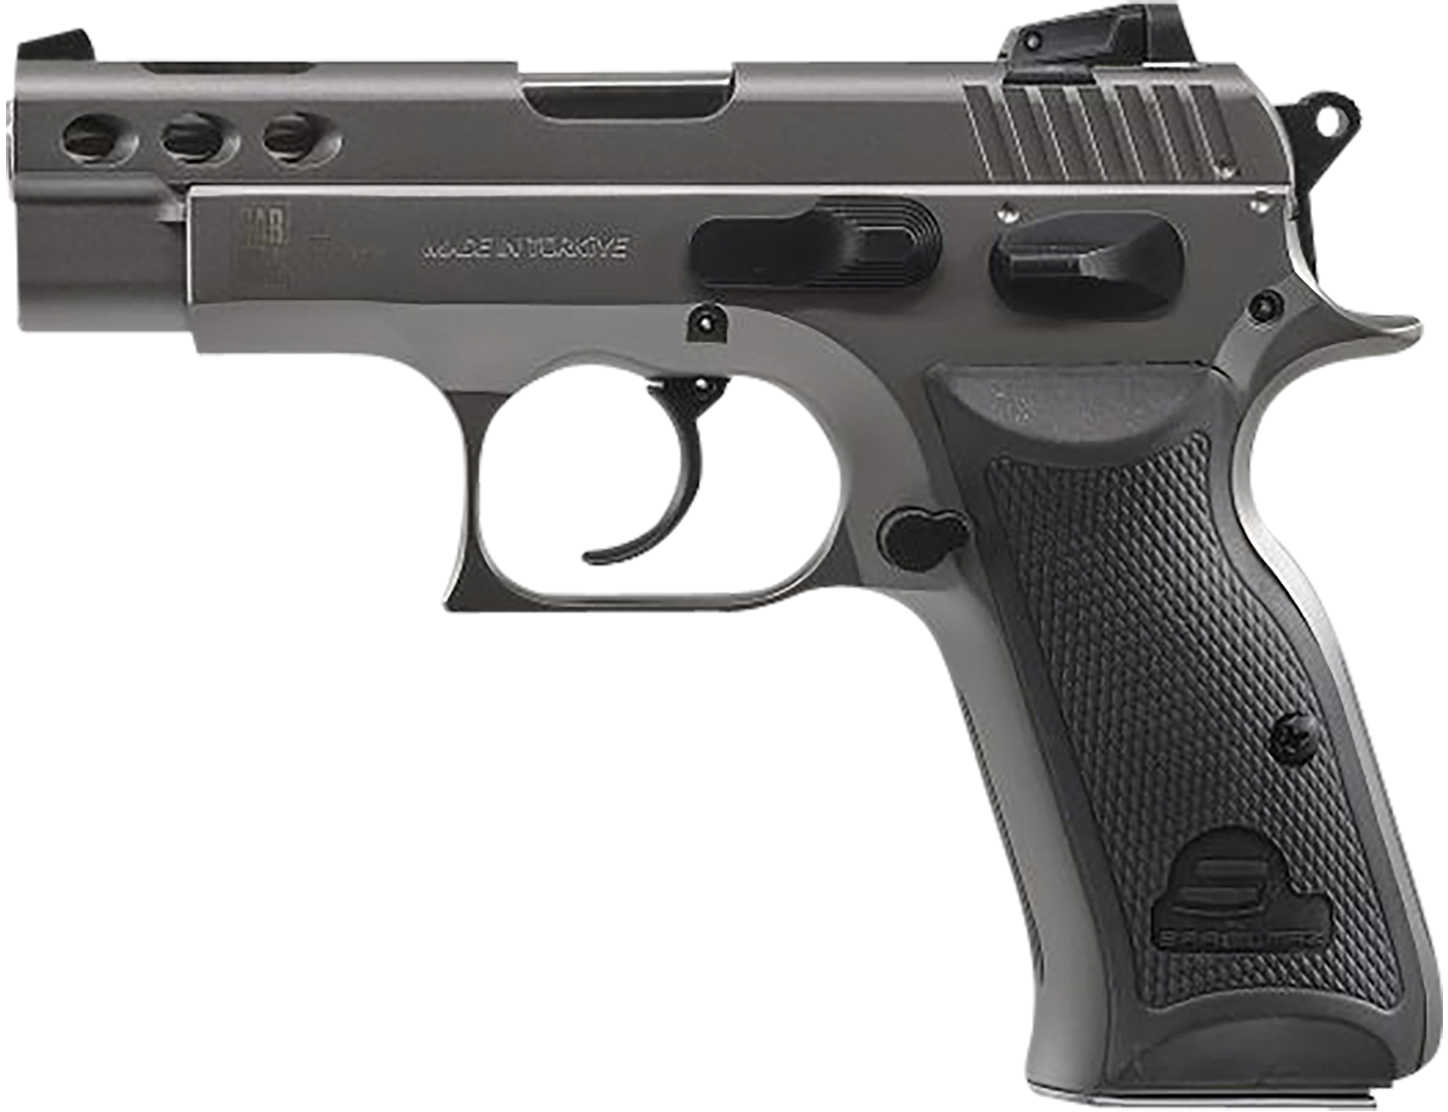 SAR P8S Compact Pistol 9mm 3.80" Ported Barrel 17 Round Stainless Steel Finish Black Polymer Grip P8SST